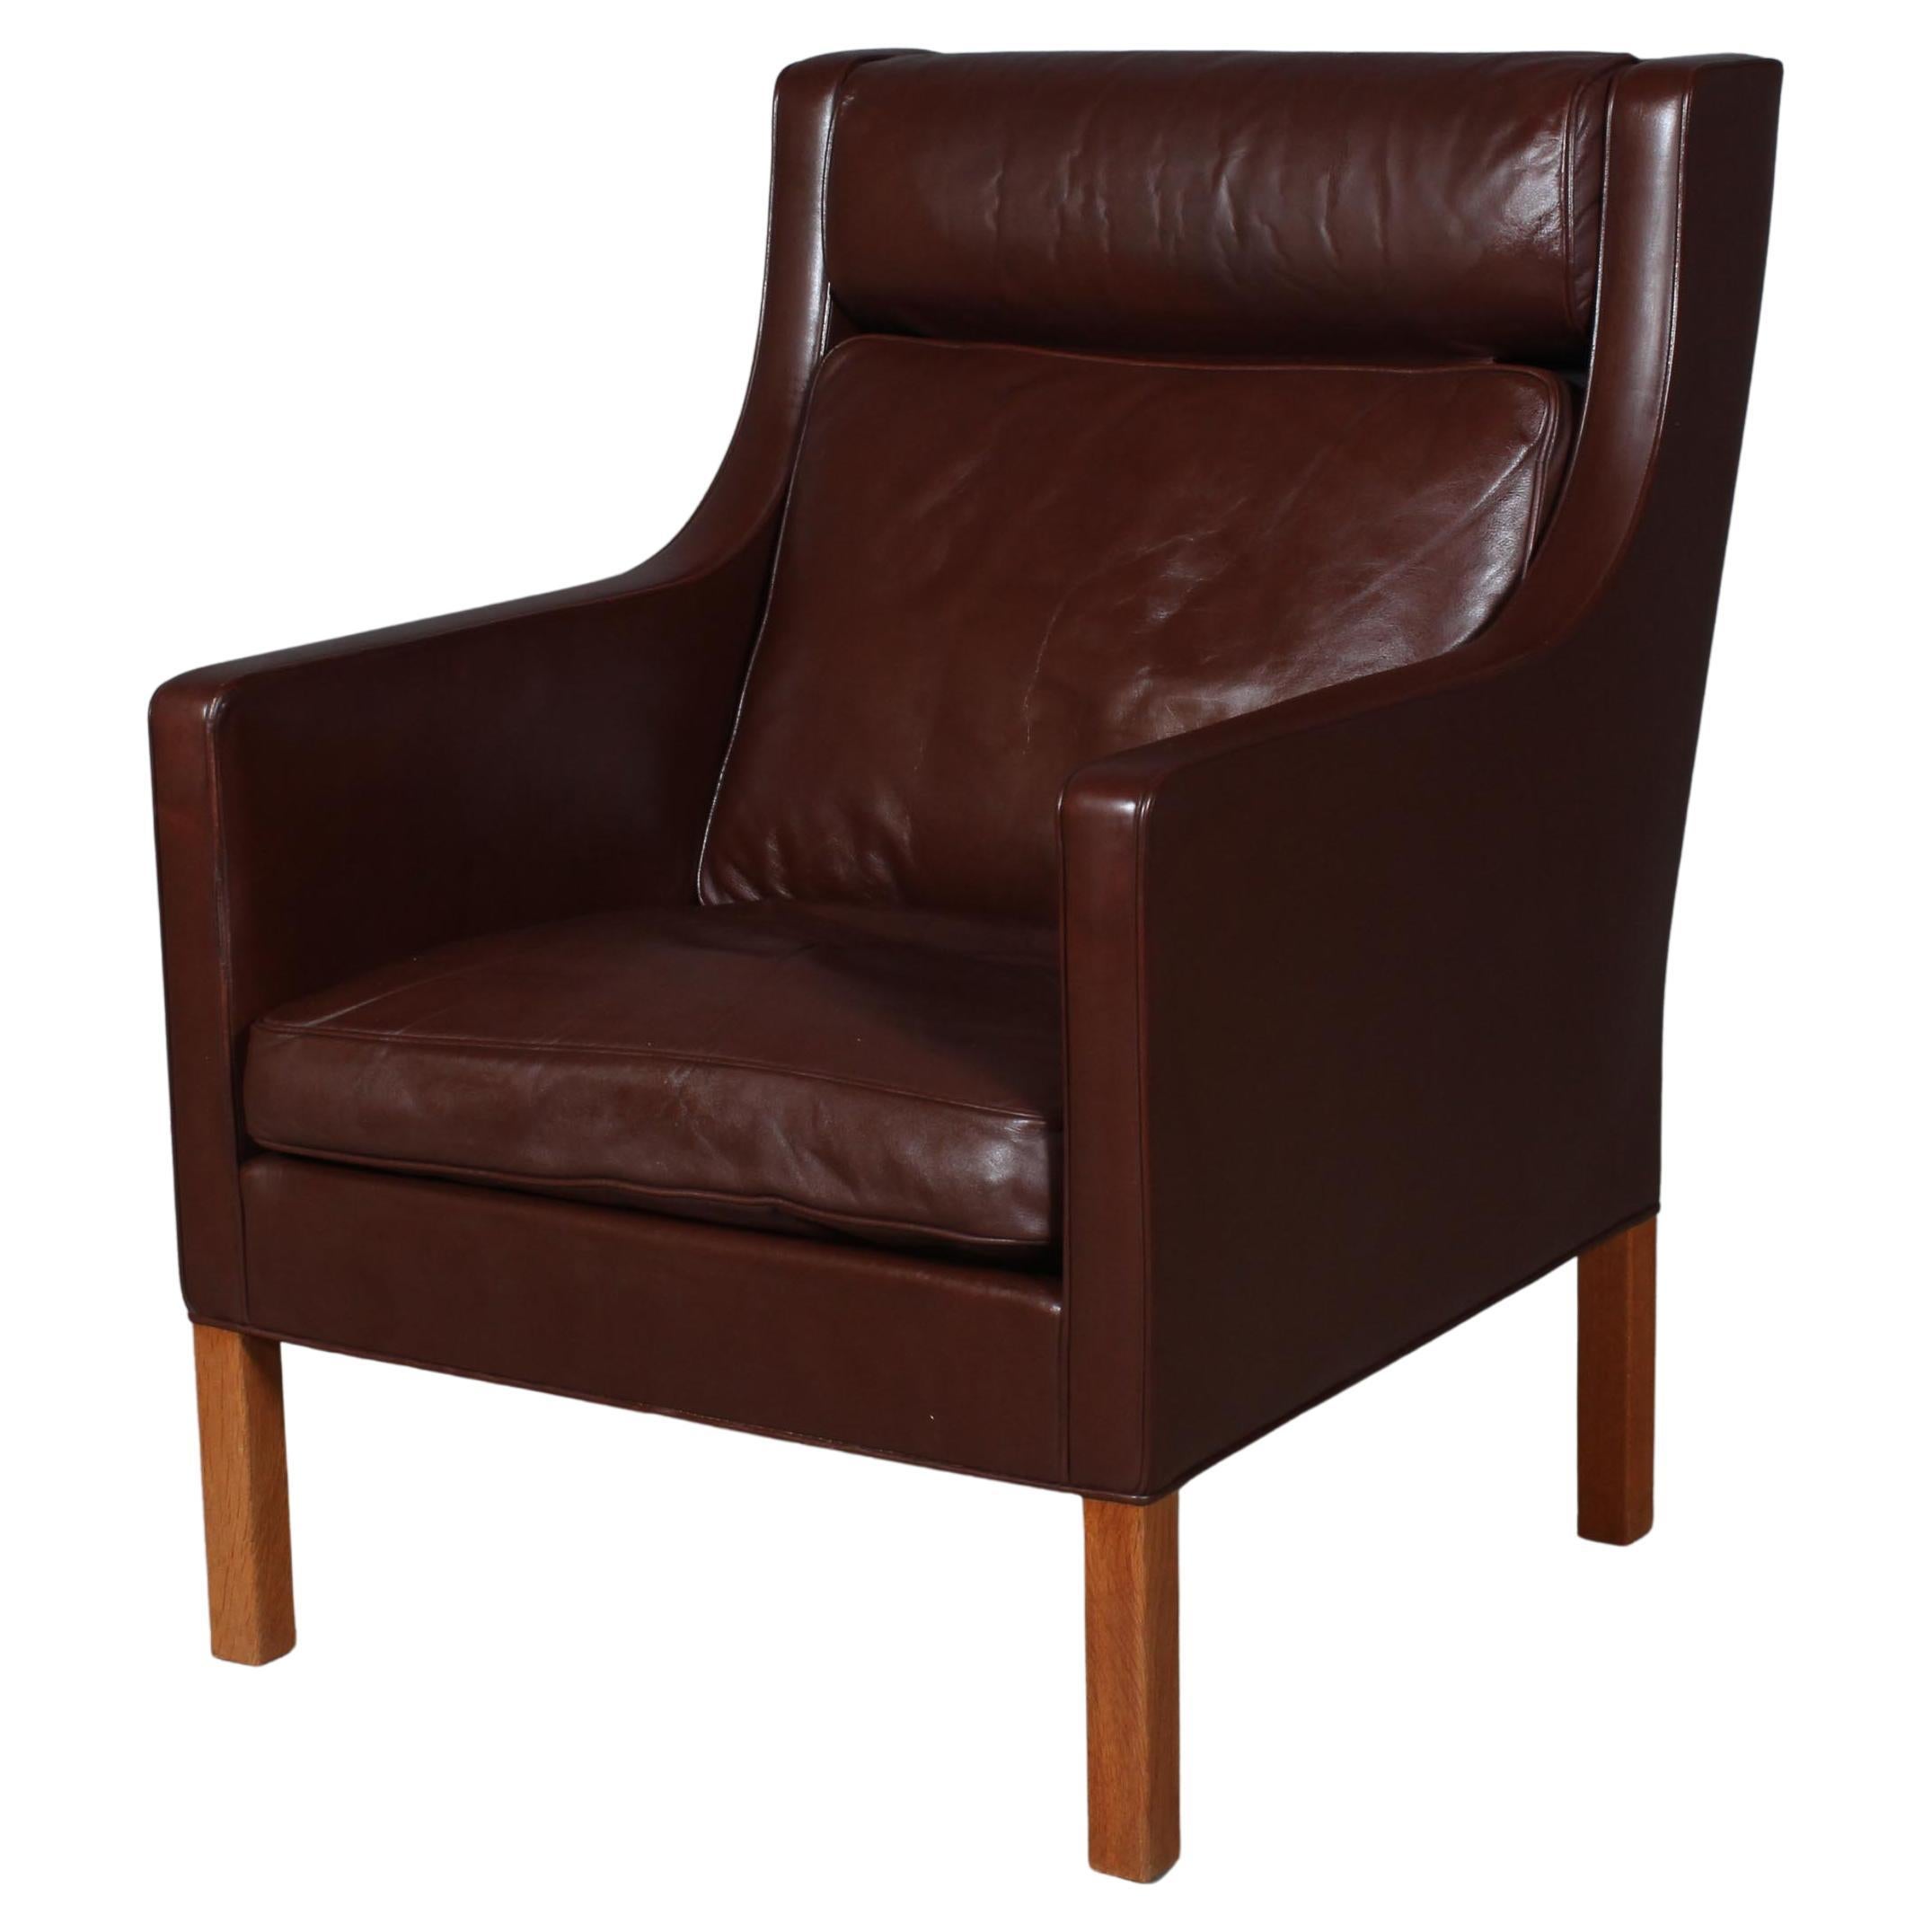 Børge & Peter Mogensen Lounge Chair in Brown Leather, Model 2431